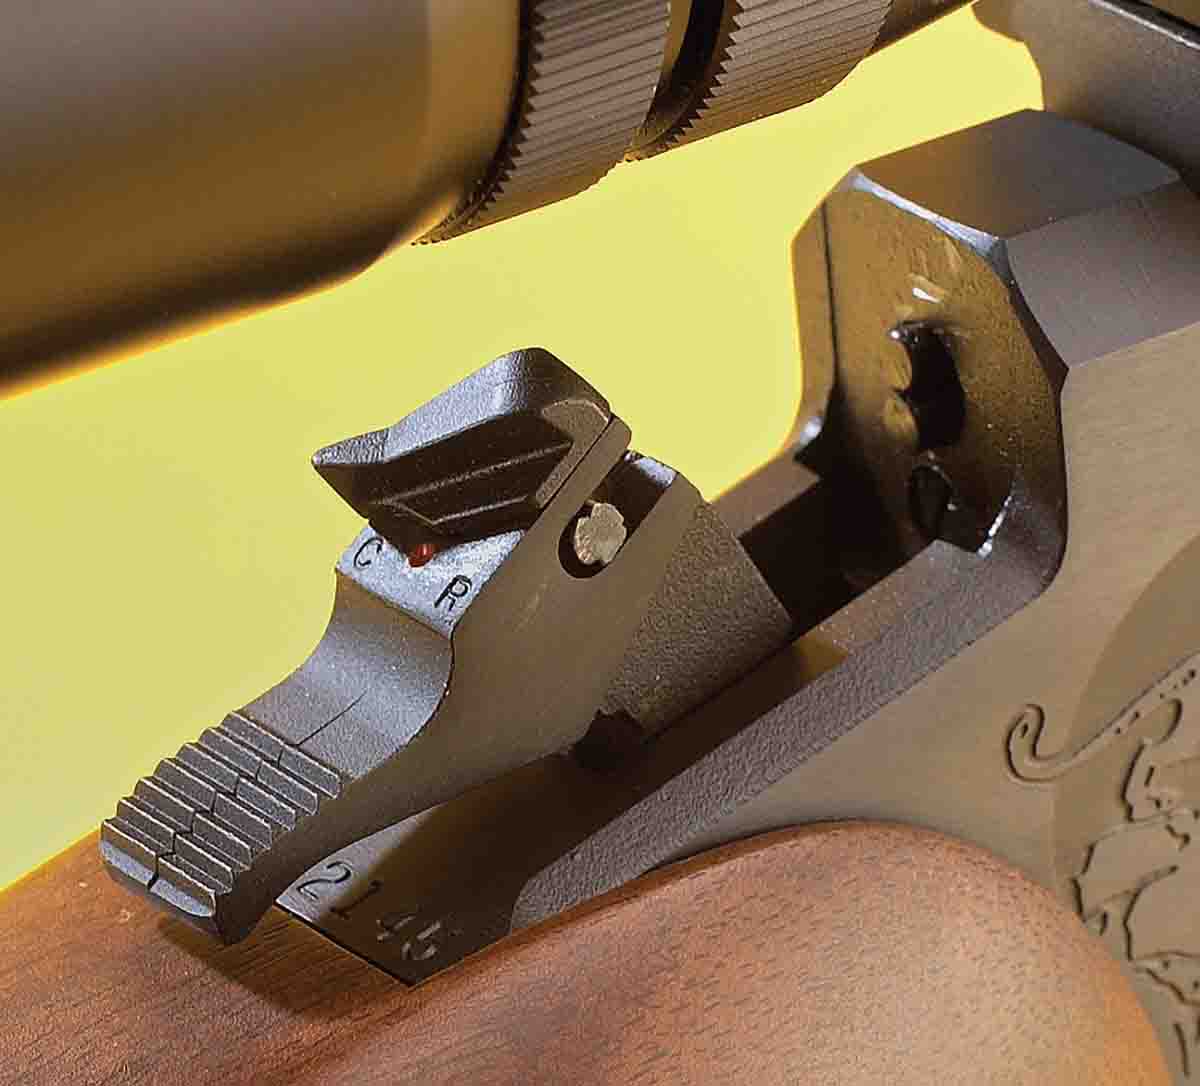 The hammer on the Contender is made to fire both rimfire and centerfire barrels. Note the dual firing pins just forward of the hammer.